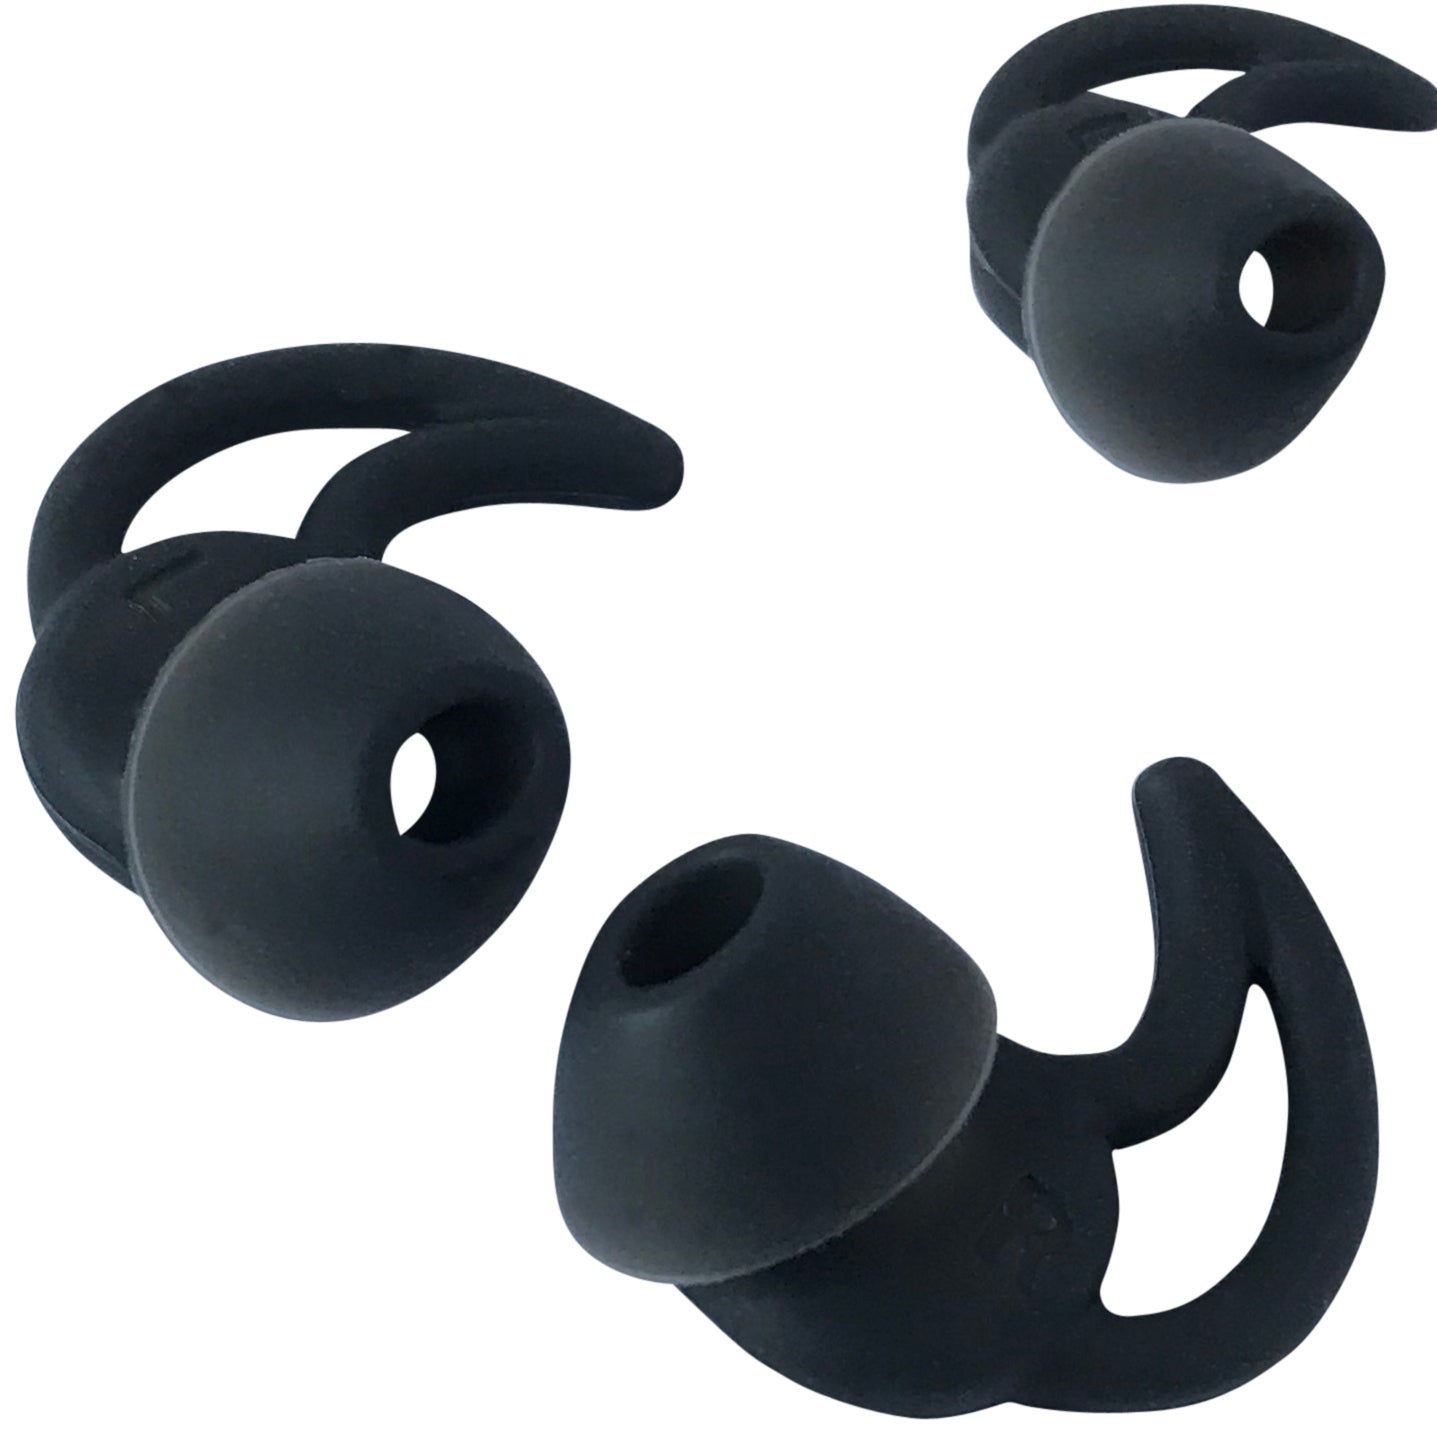 Replacement Ear Bud Tips Set for Bose SoundSport Truly Wireless In-Ear Headphones - CentralSound